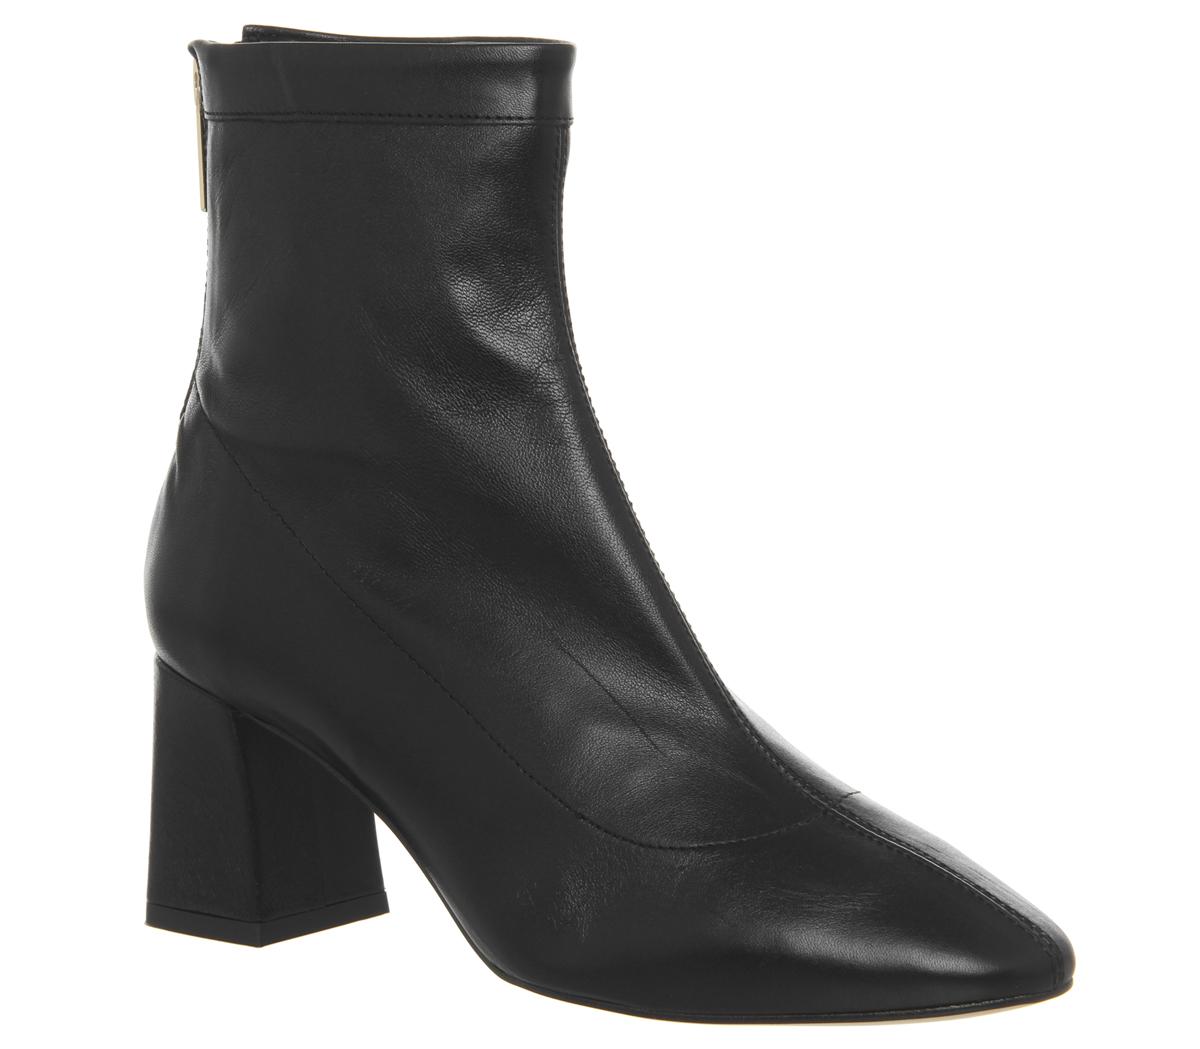 OFFICE All Day- Back Zip Block Heel Boot Black Leather - Women's Ankle ...